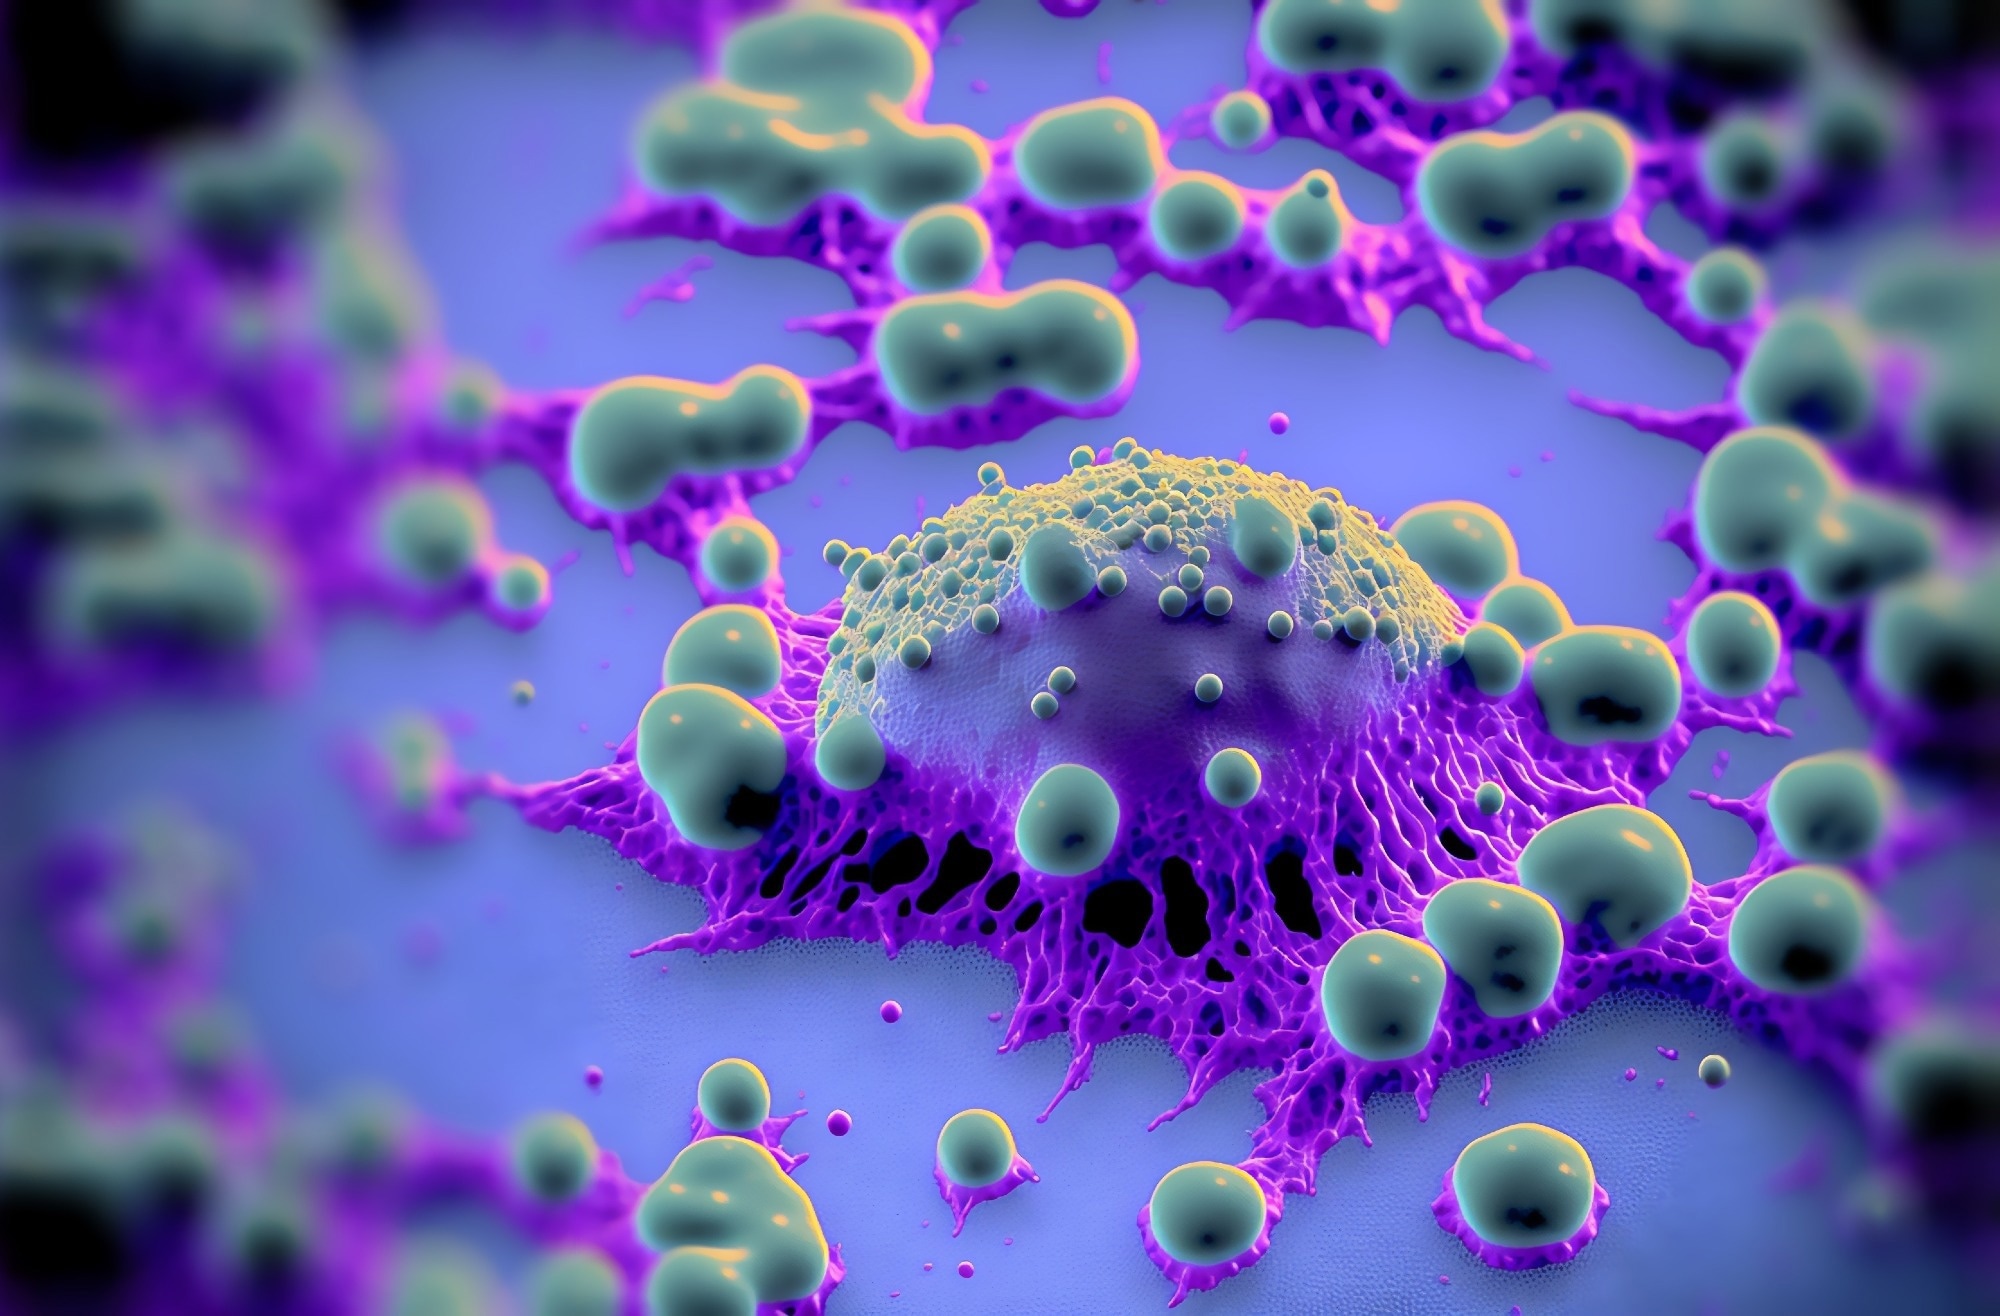 Study: Exploring new perspectives in immunology. Image Credit: CI Photos / Shutterstock